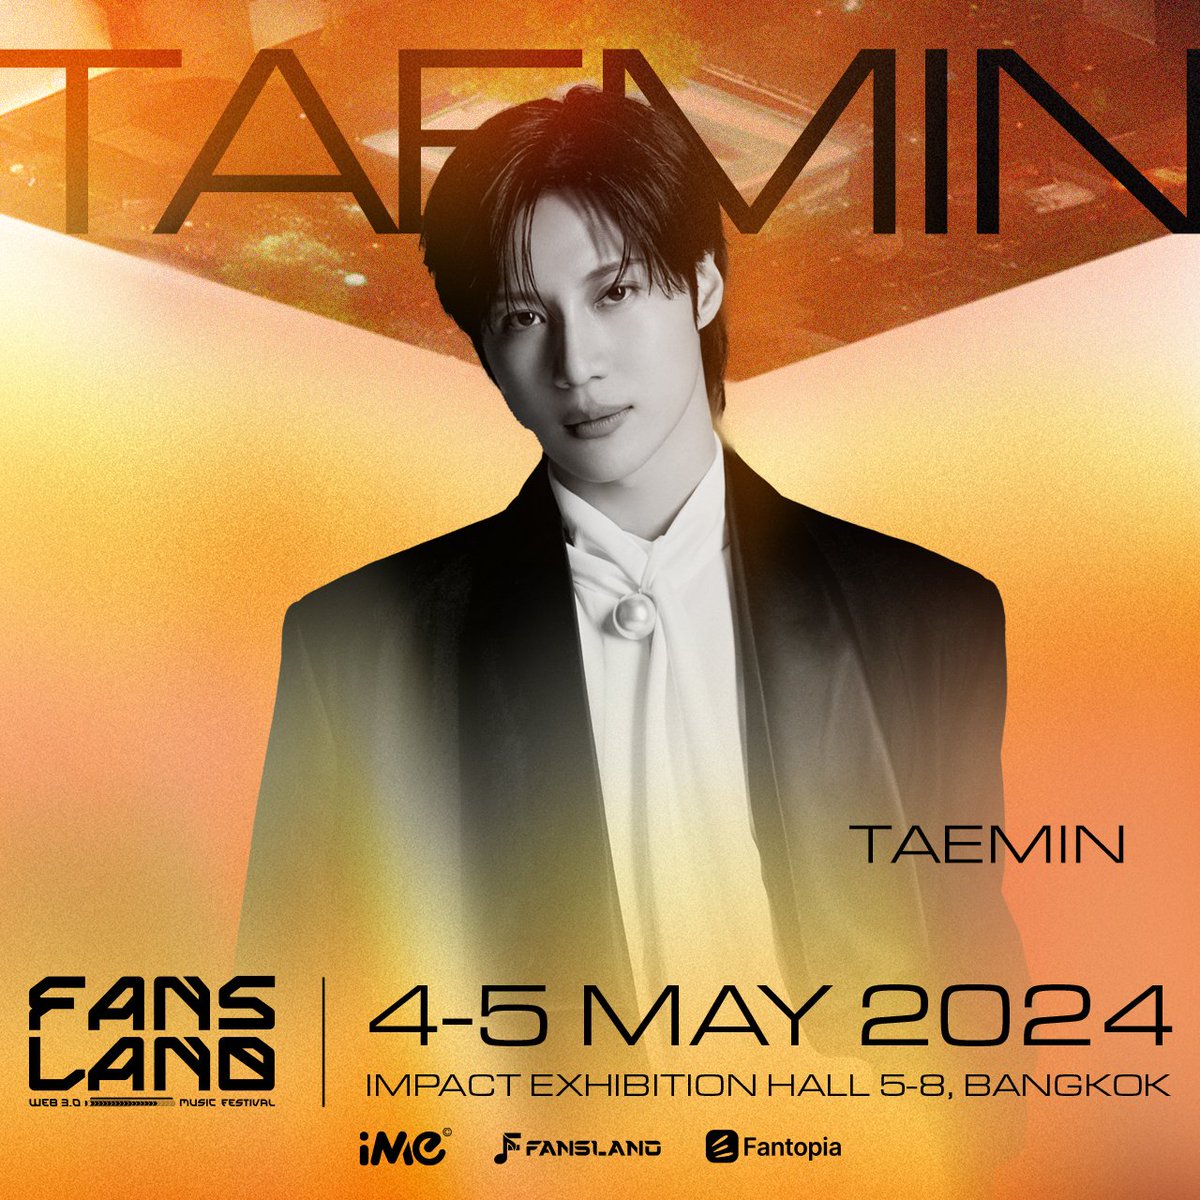 With one-of-a-kind charm through performance and unique voice. The stage is his domain. There is no one else like 𝗧𝗔𝗘𝗠𝗜𝗡 in the world!! Join Fansland Music Festival and participate in this incomparable experience! #TAEMIN @TAEMIN_BPM #fanslandmusicfestival #WAGMI #iMe